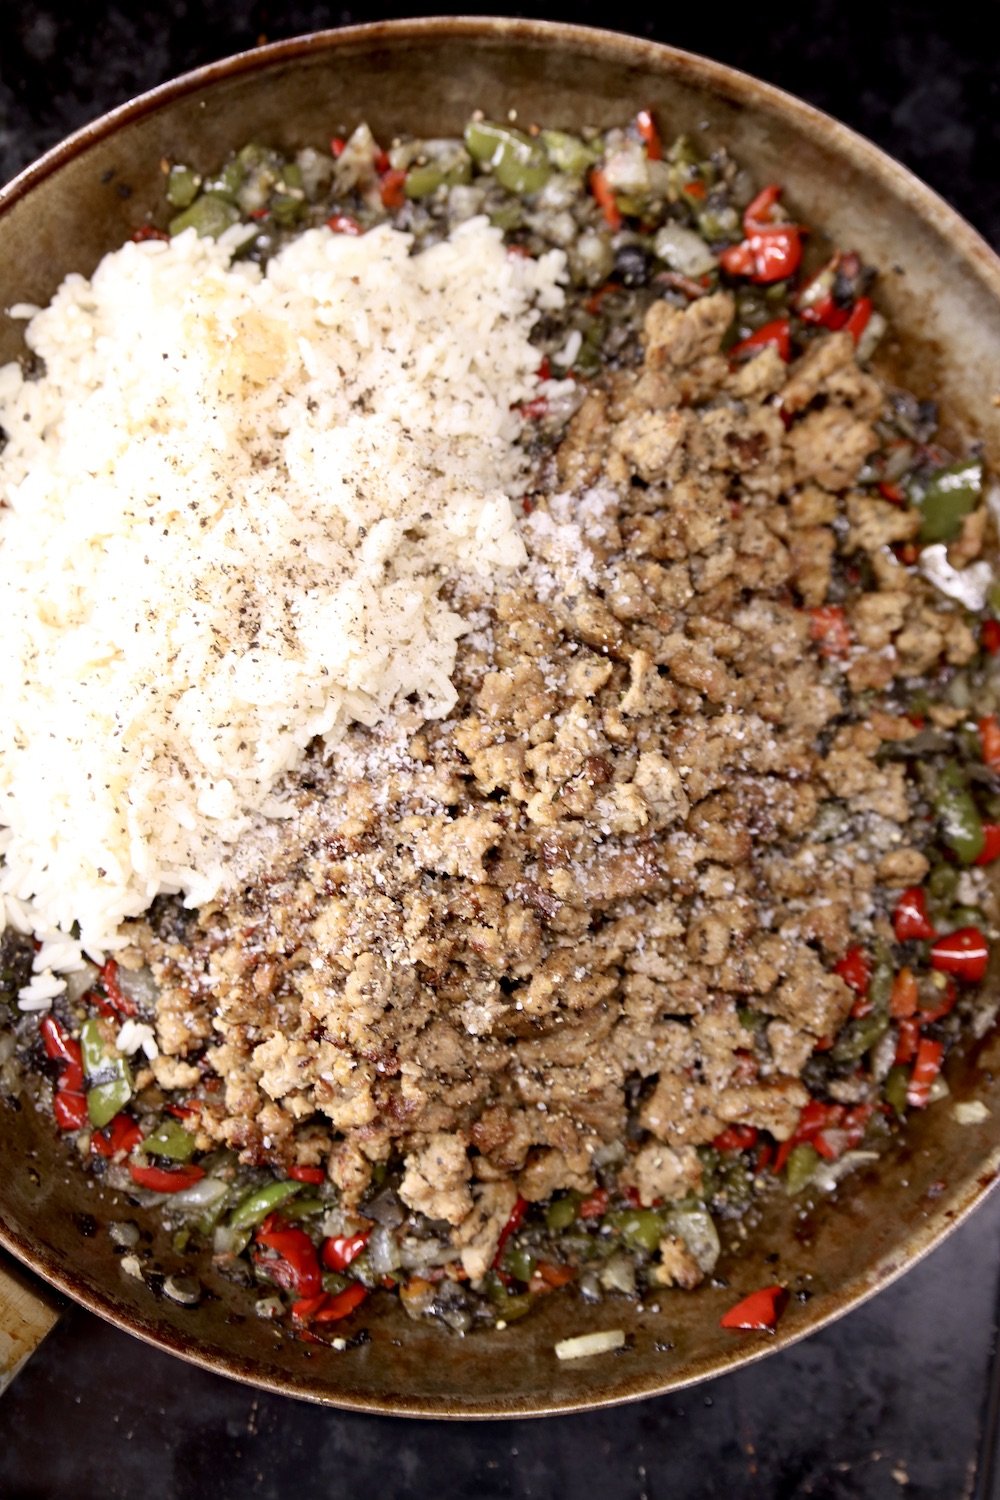 Skillet with cooked peppers, sausage and white rice